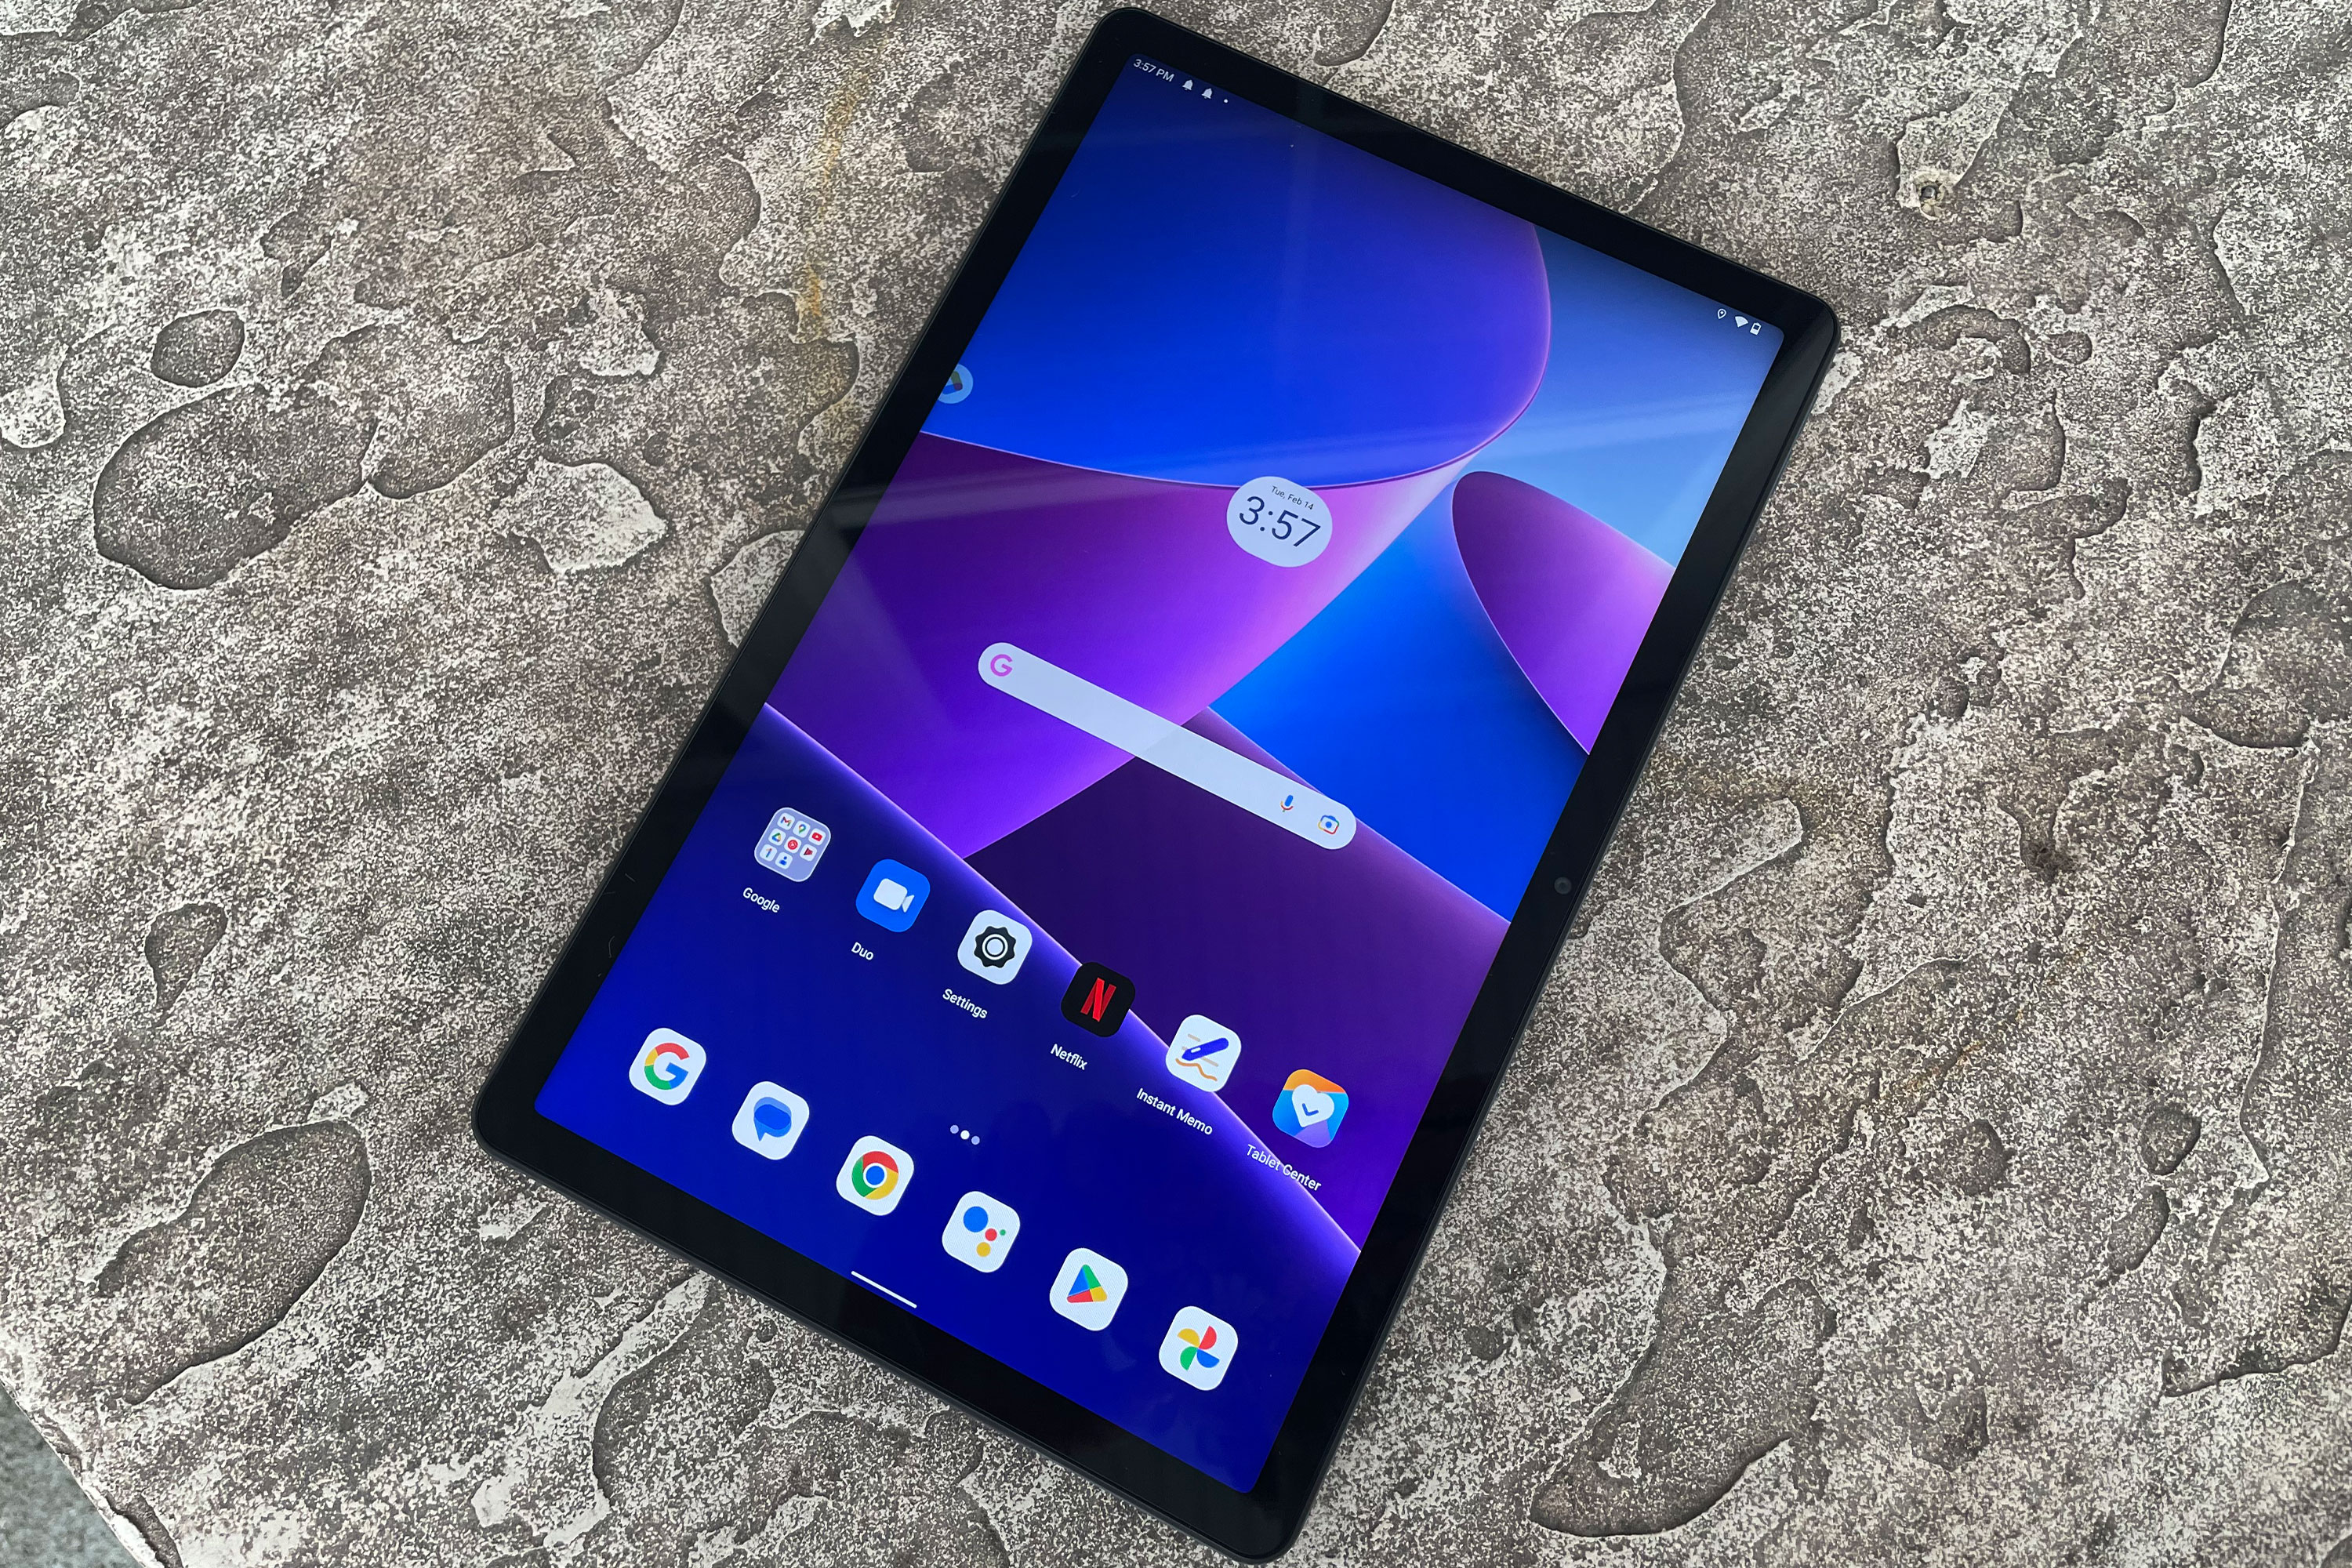 5 Best Android Tablets of 2020 - Android Tablet Reviews